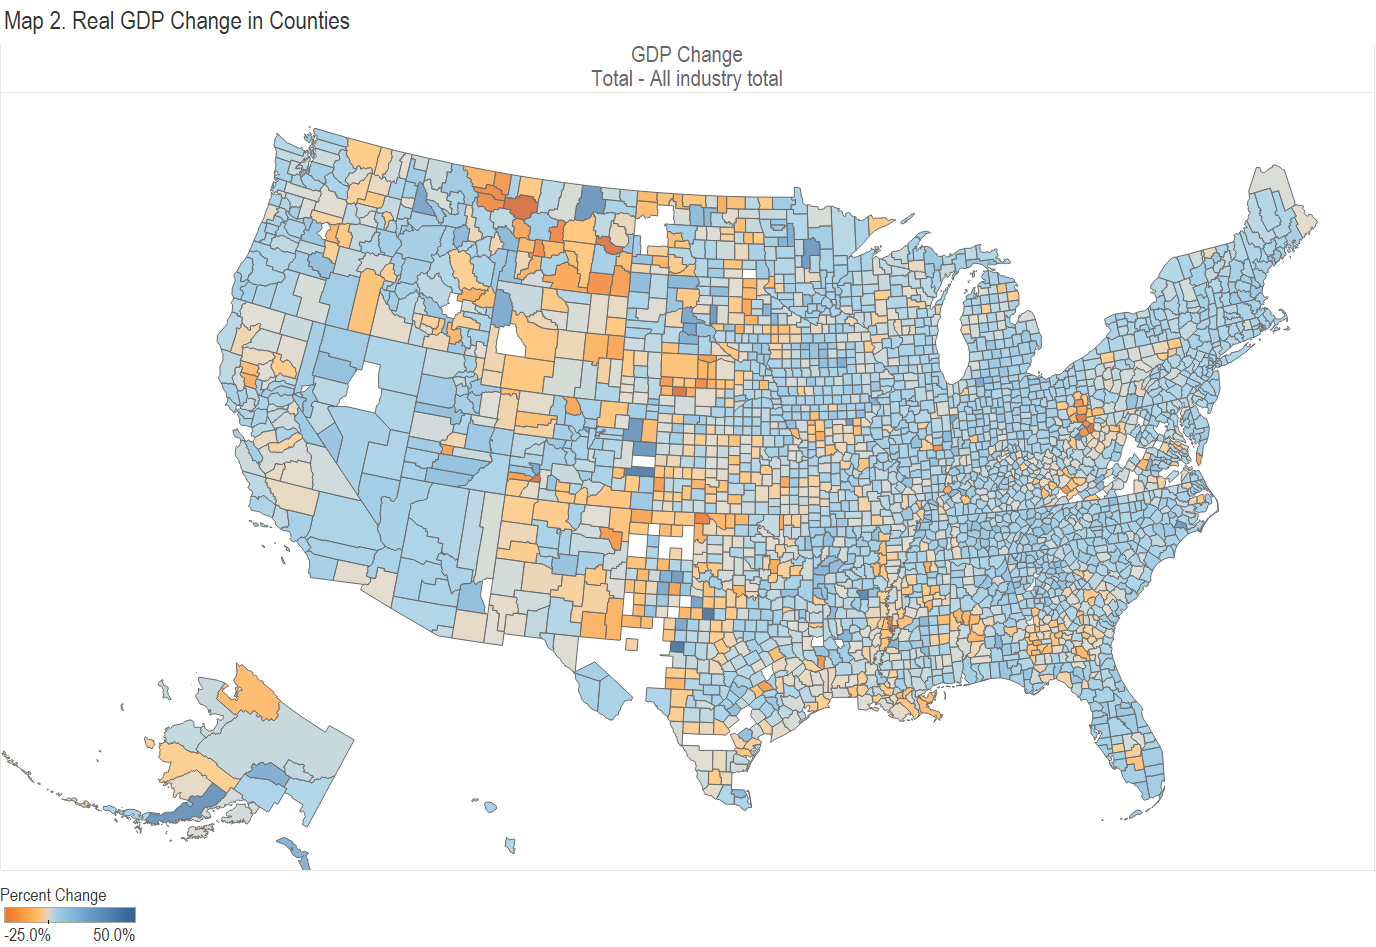 Gross Domestic Product by County and Industry